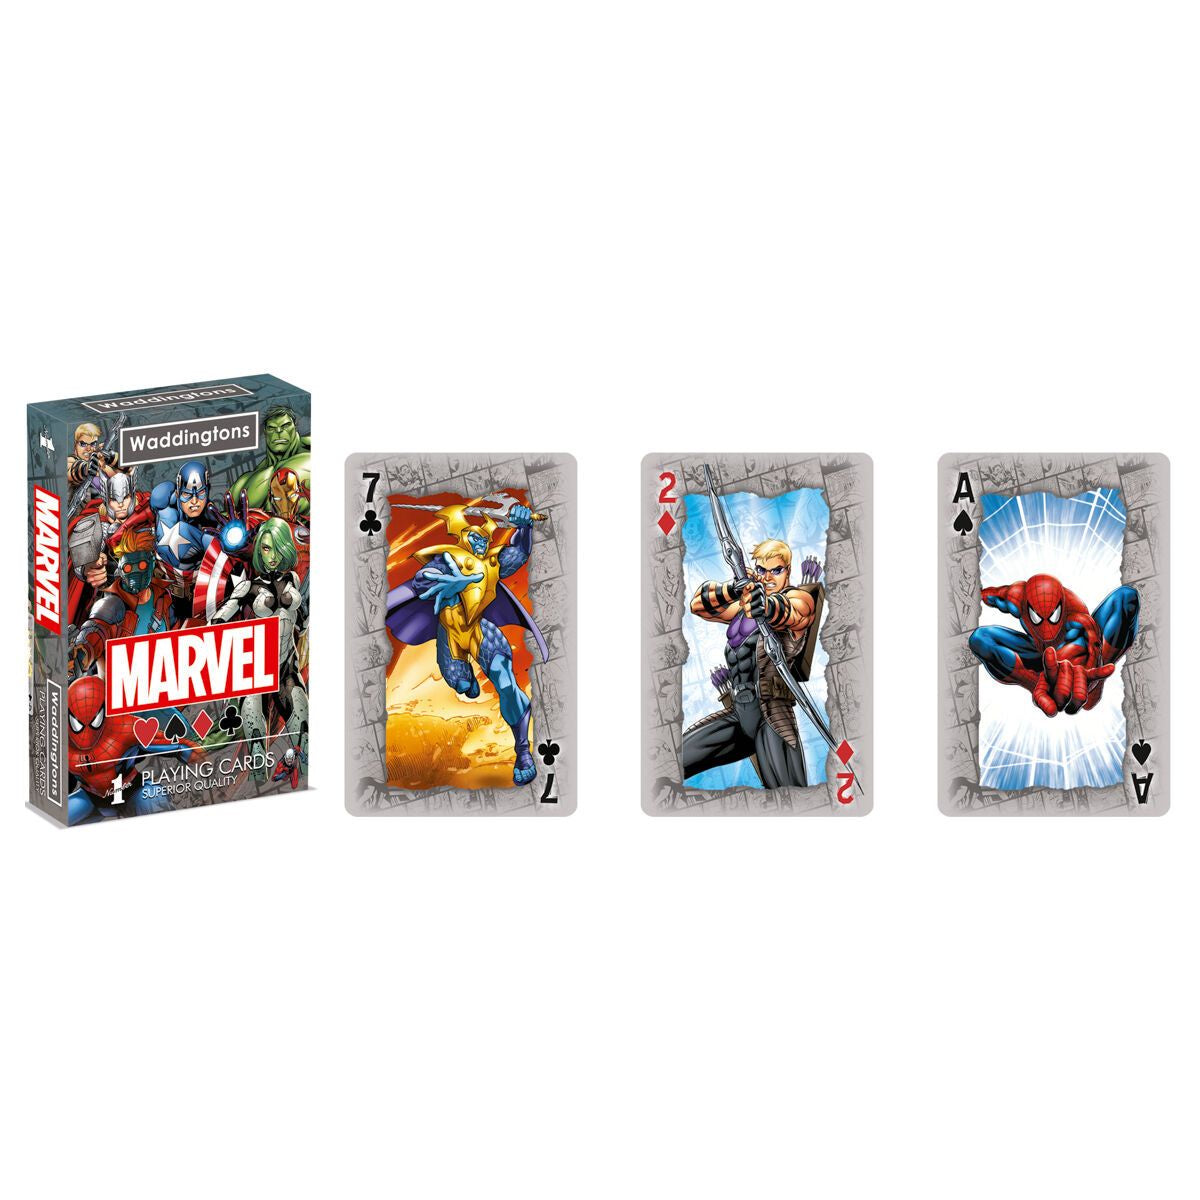 MARVEL - Universe Waddingtons Number 1 Playing Cards